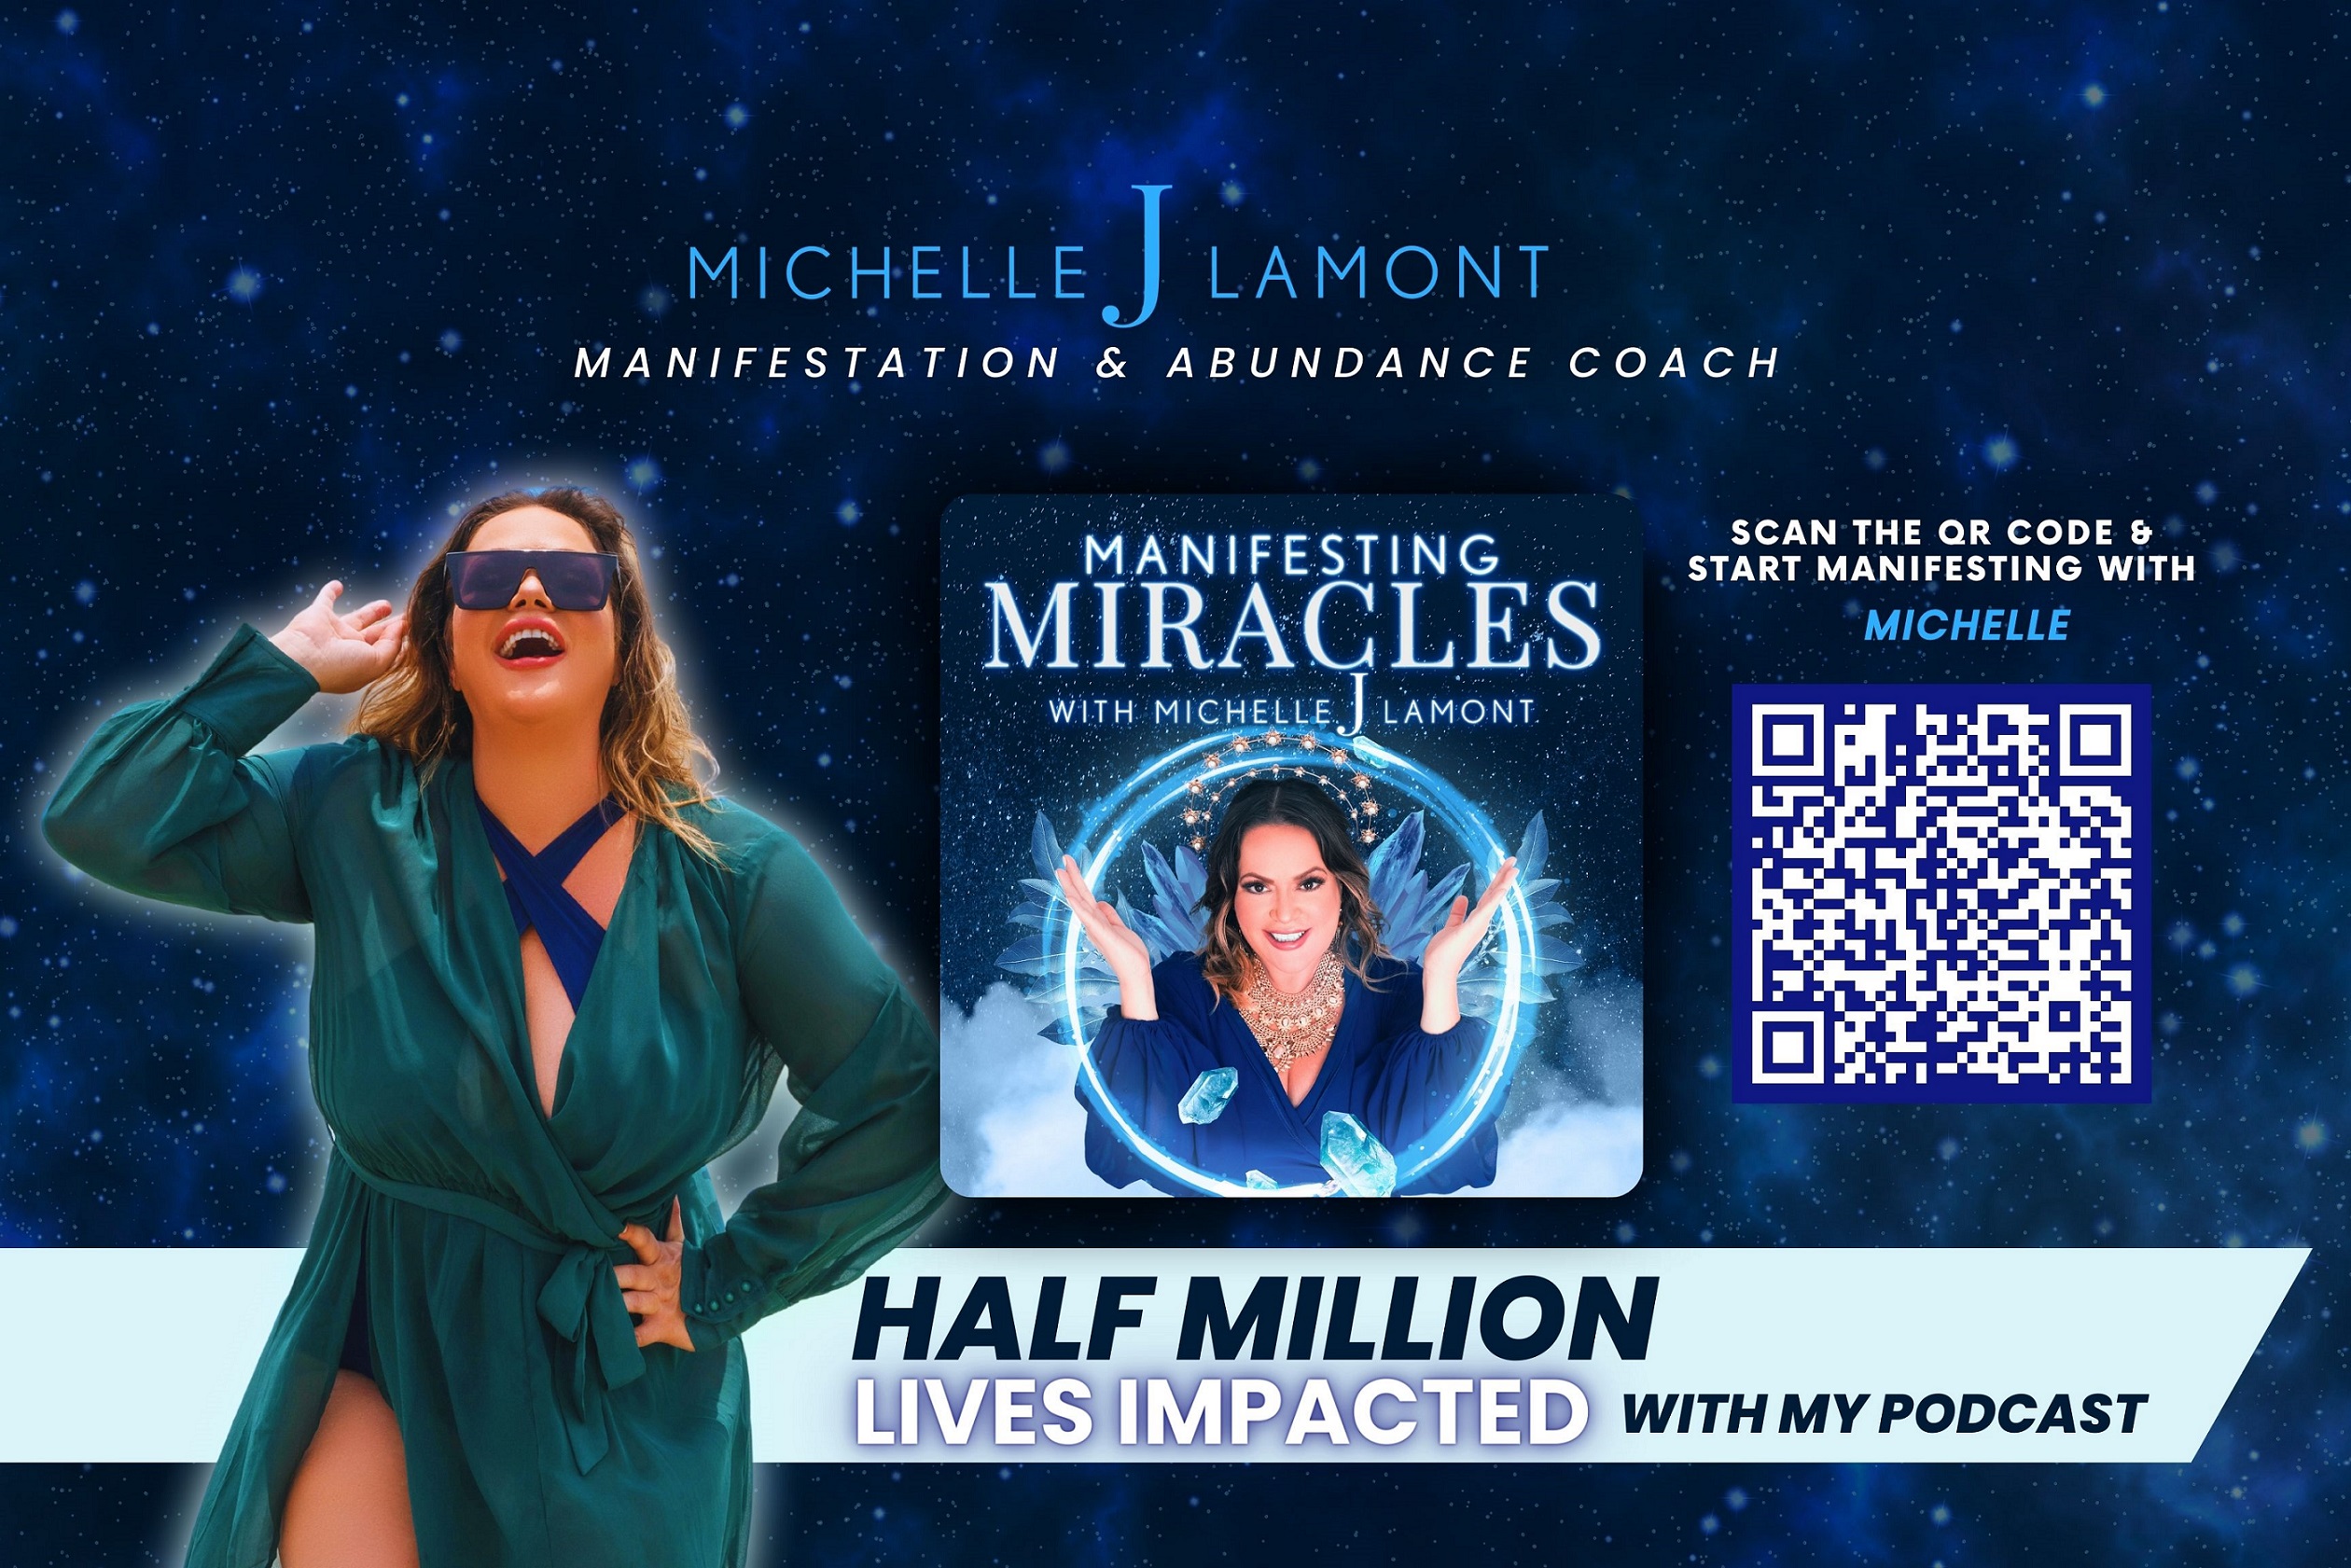 half million lives impacted with michelle podcast